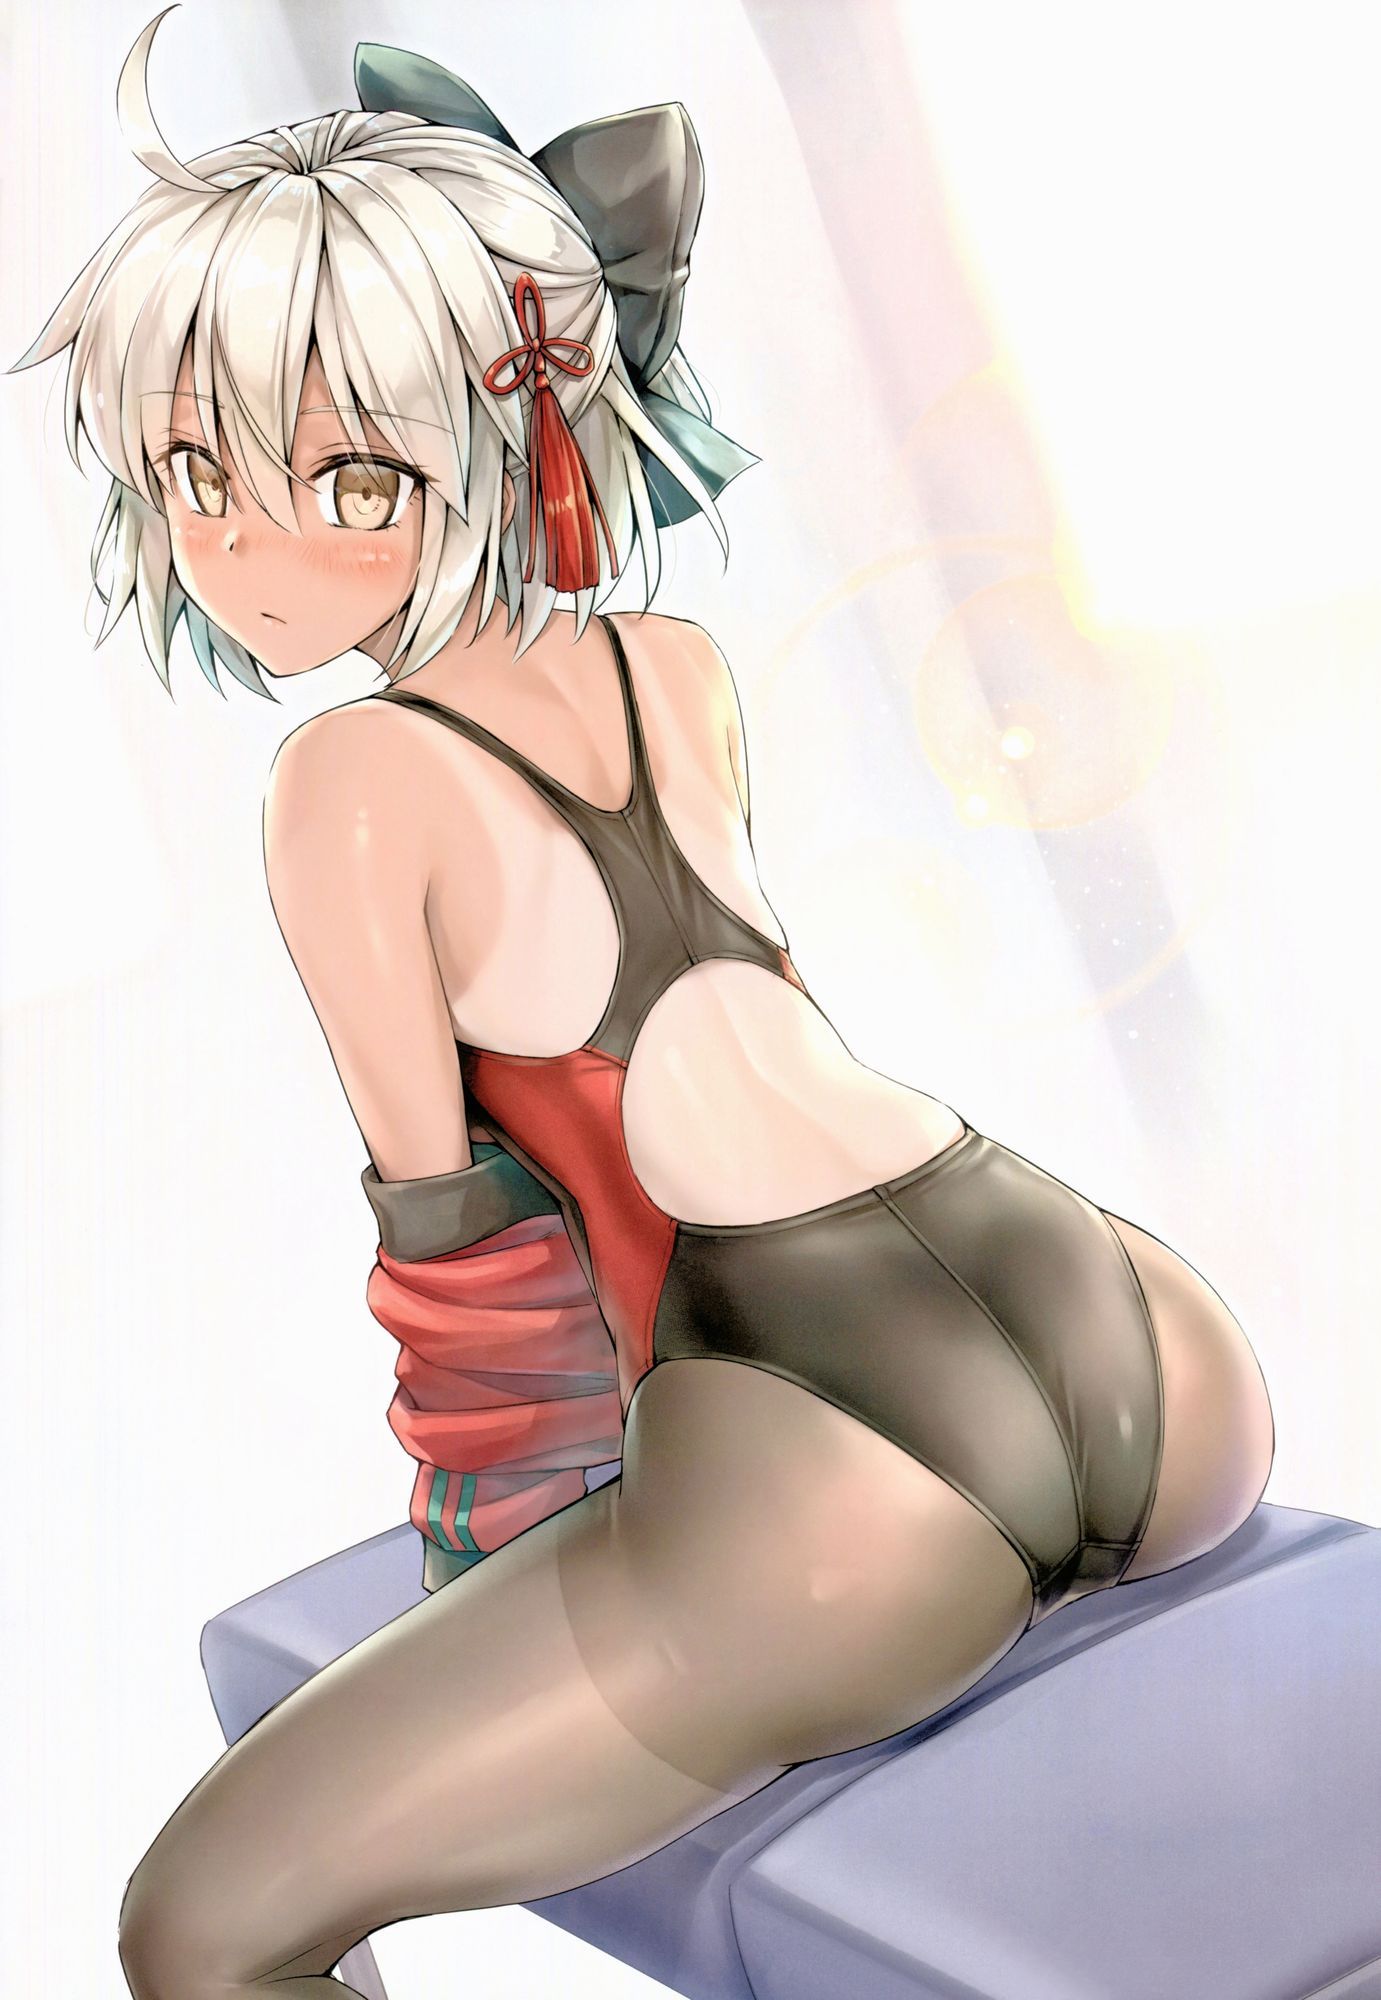 【2nd】Erotic image of a girl with a sunburn after Part 17 12